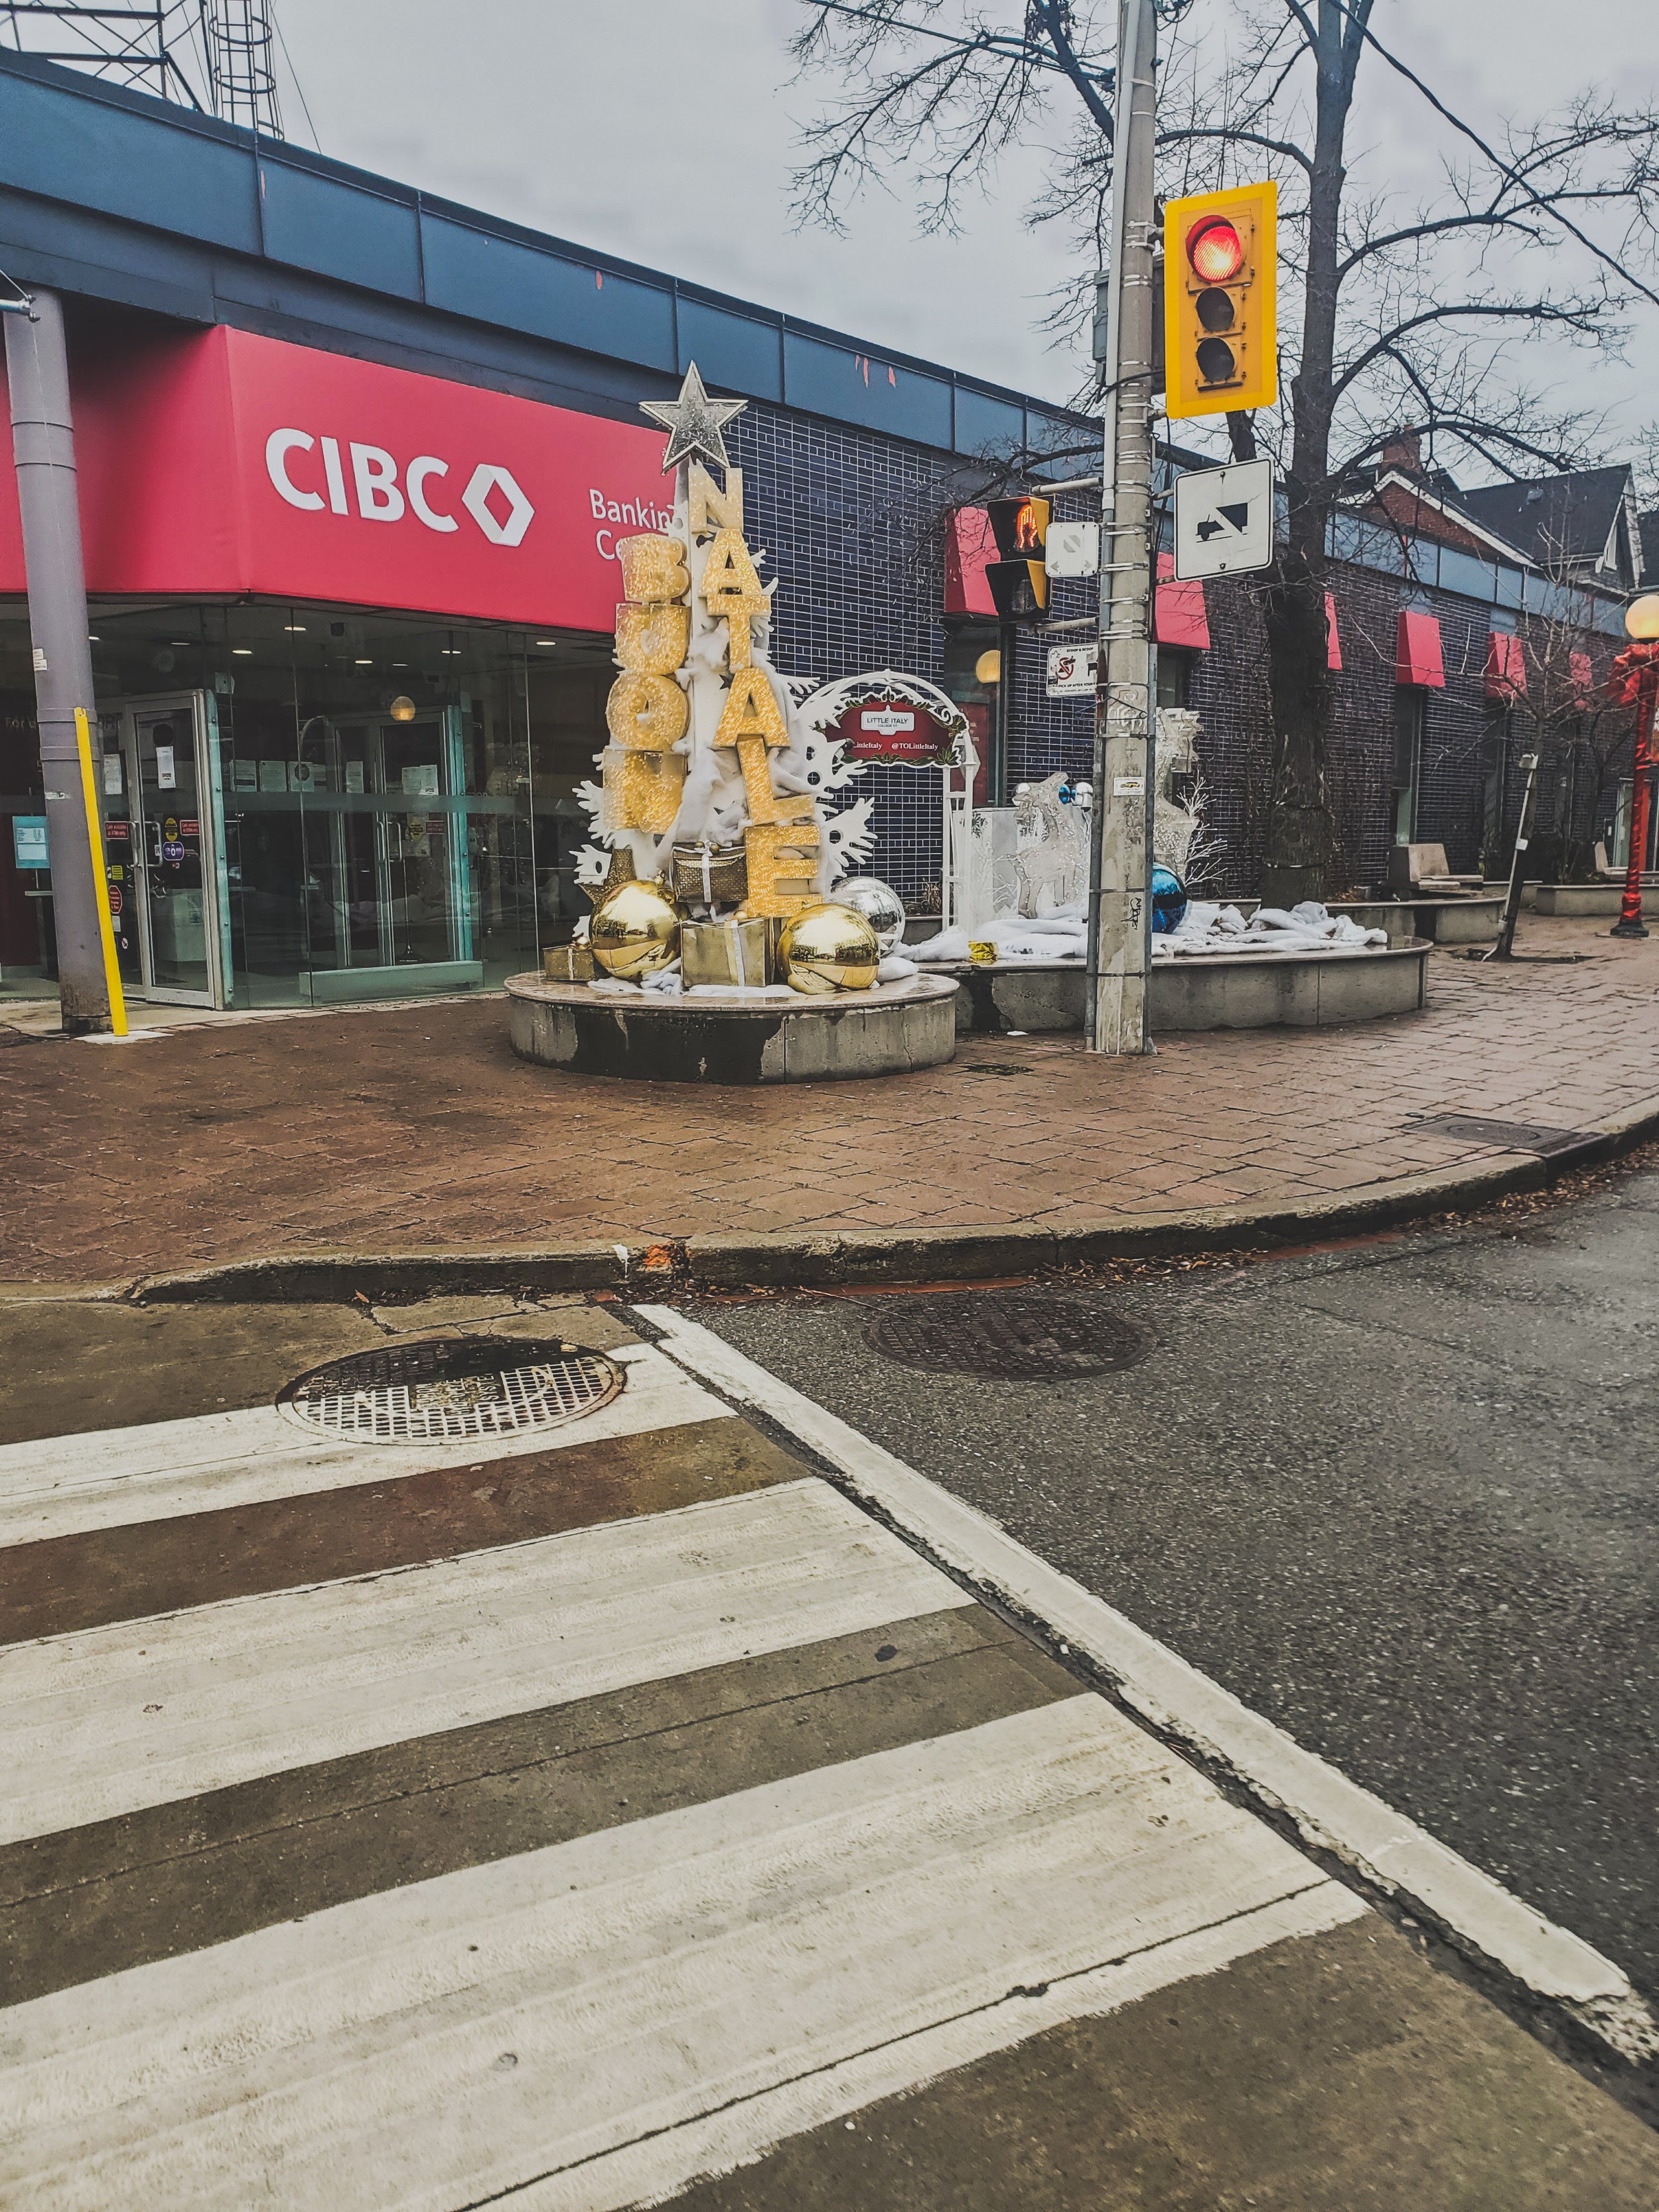  Buon Natale from Little Italy or at least from CIBC! 